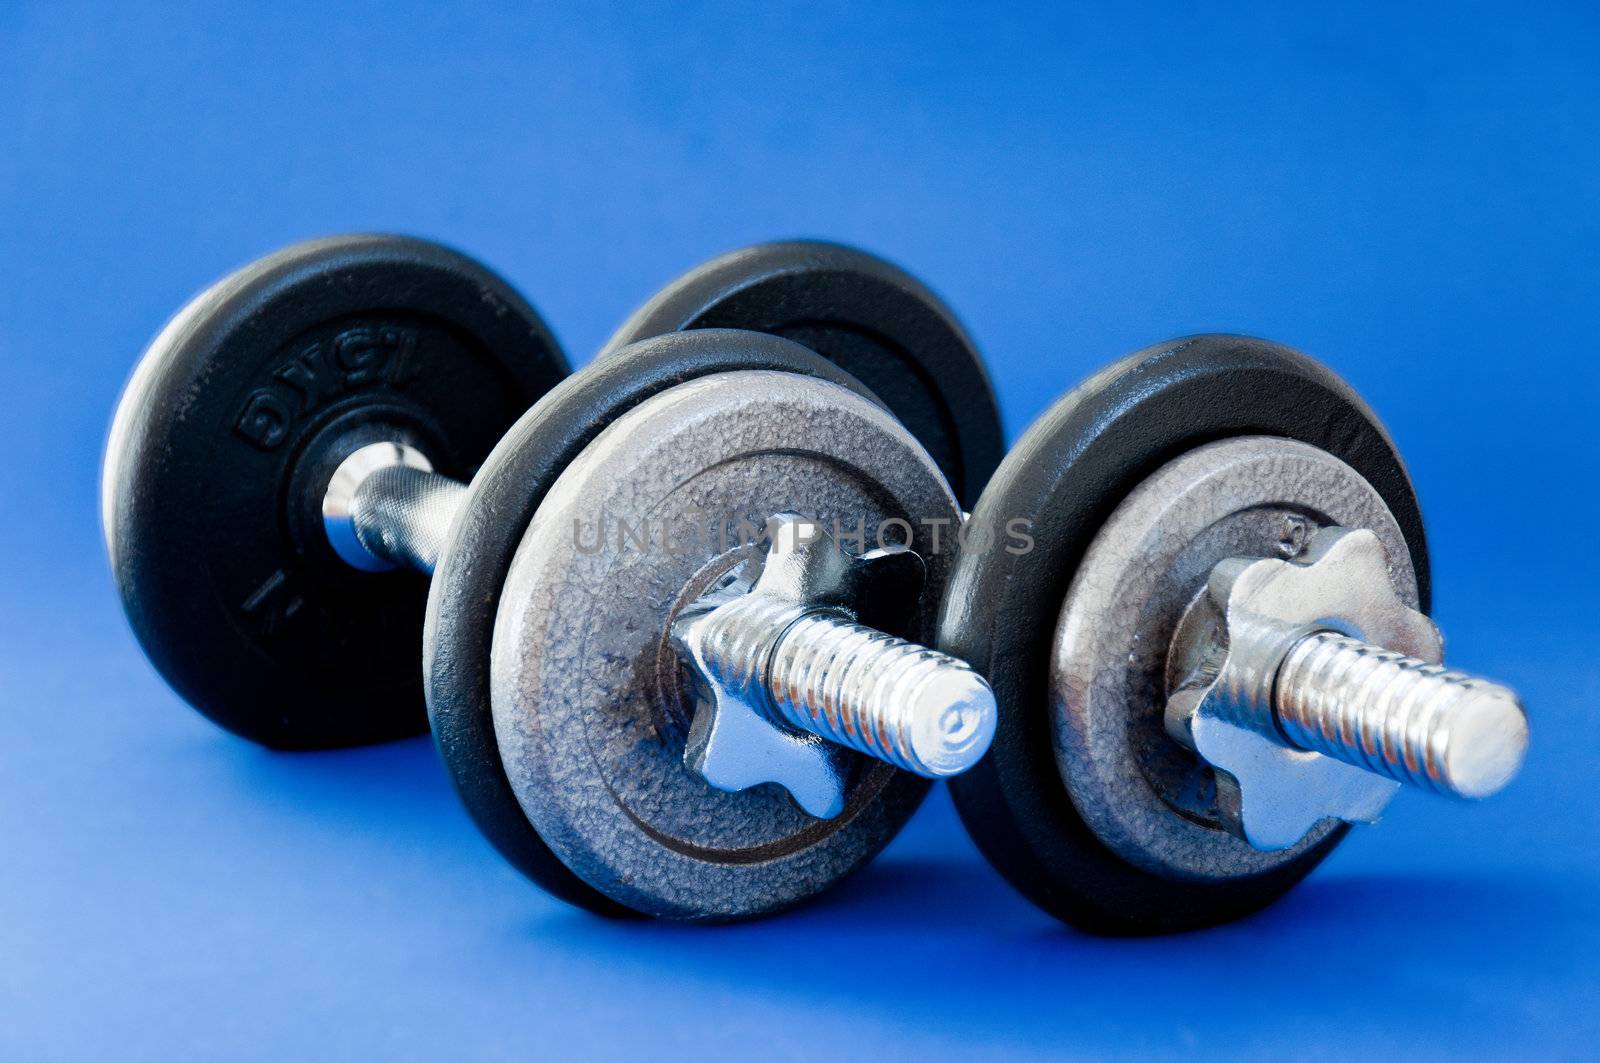 A pair of barbells on a blue background